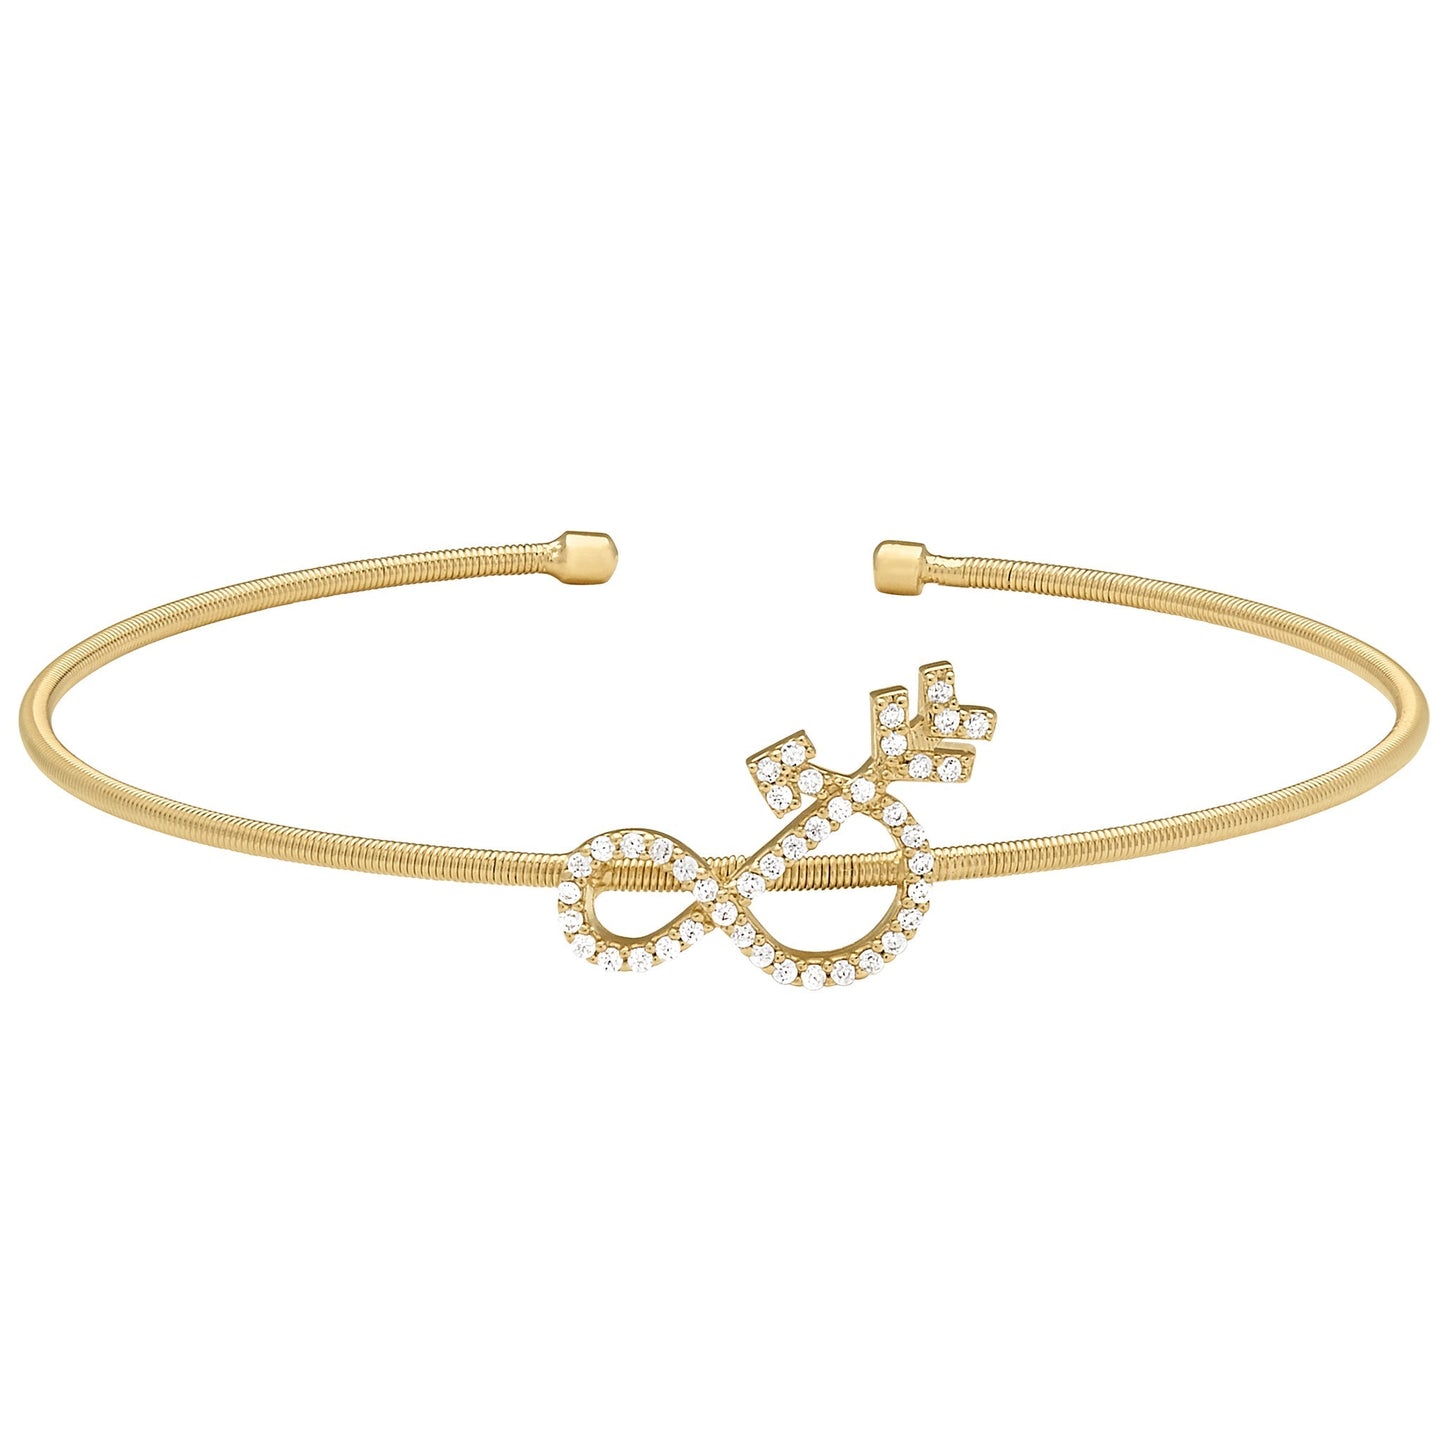 A ampersand flexible cable bracelet with simulated diamonds displayed on a neutral white background.